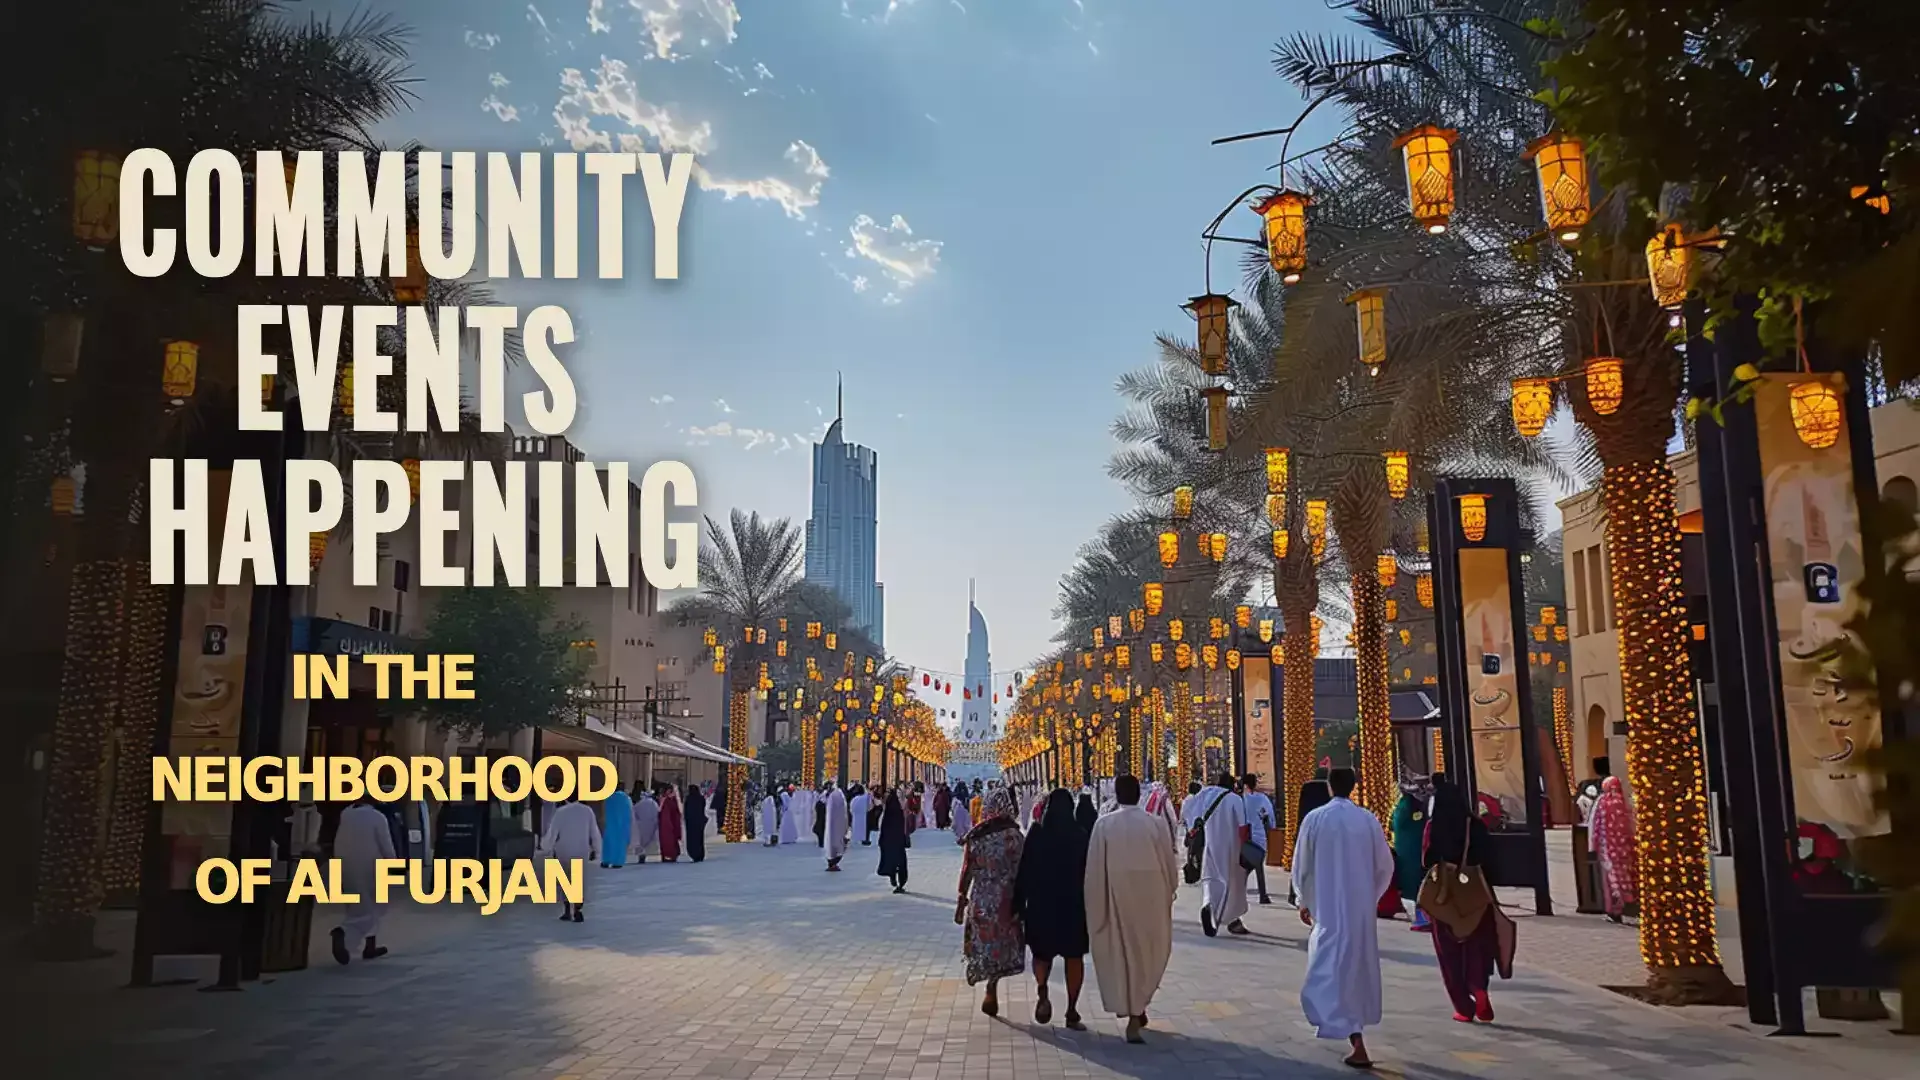 Al Furjan's Community Events - Embrace the Spirit of Togetherness and Fun